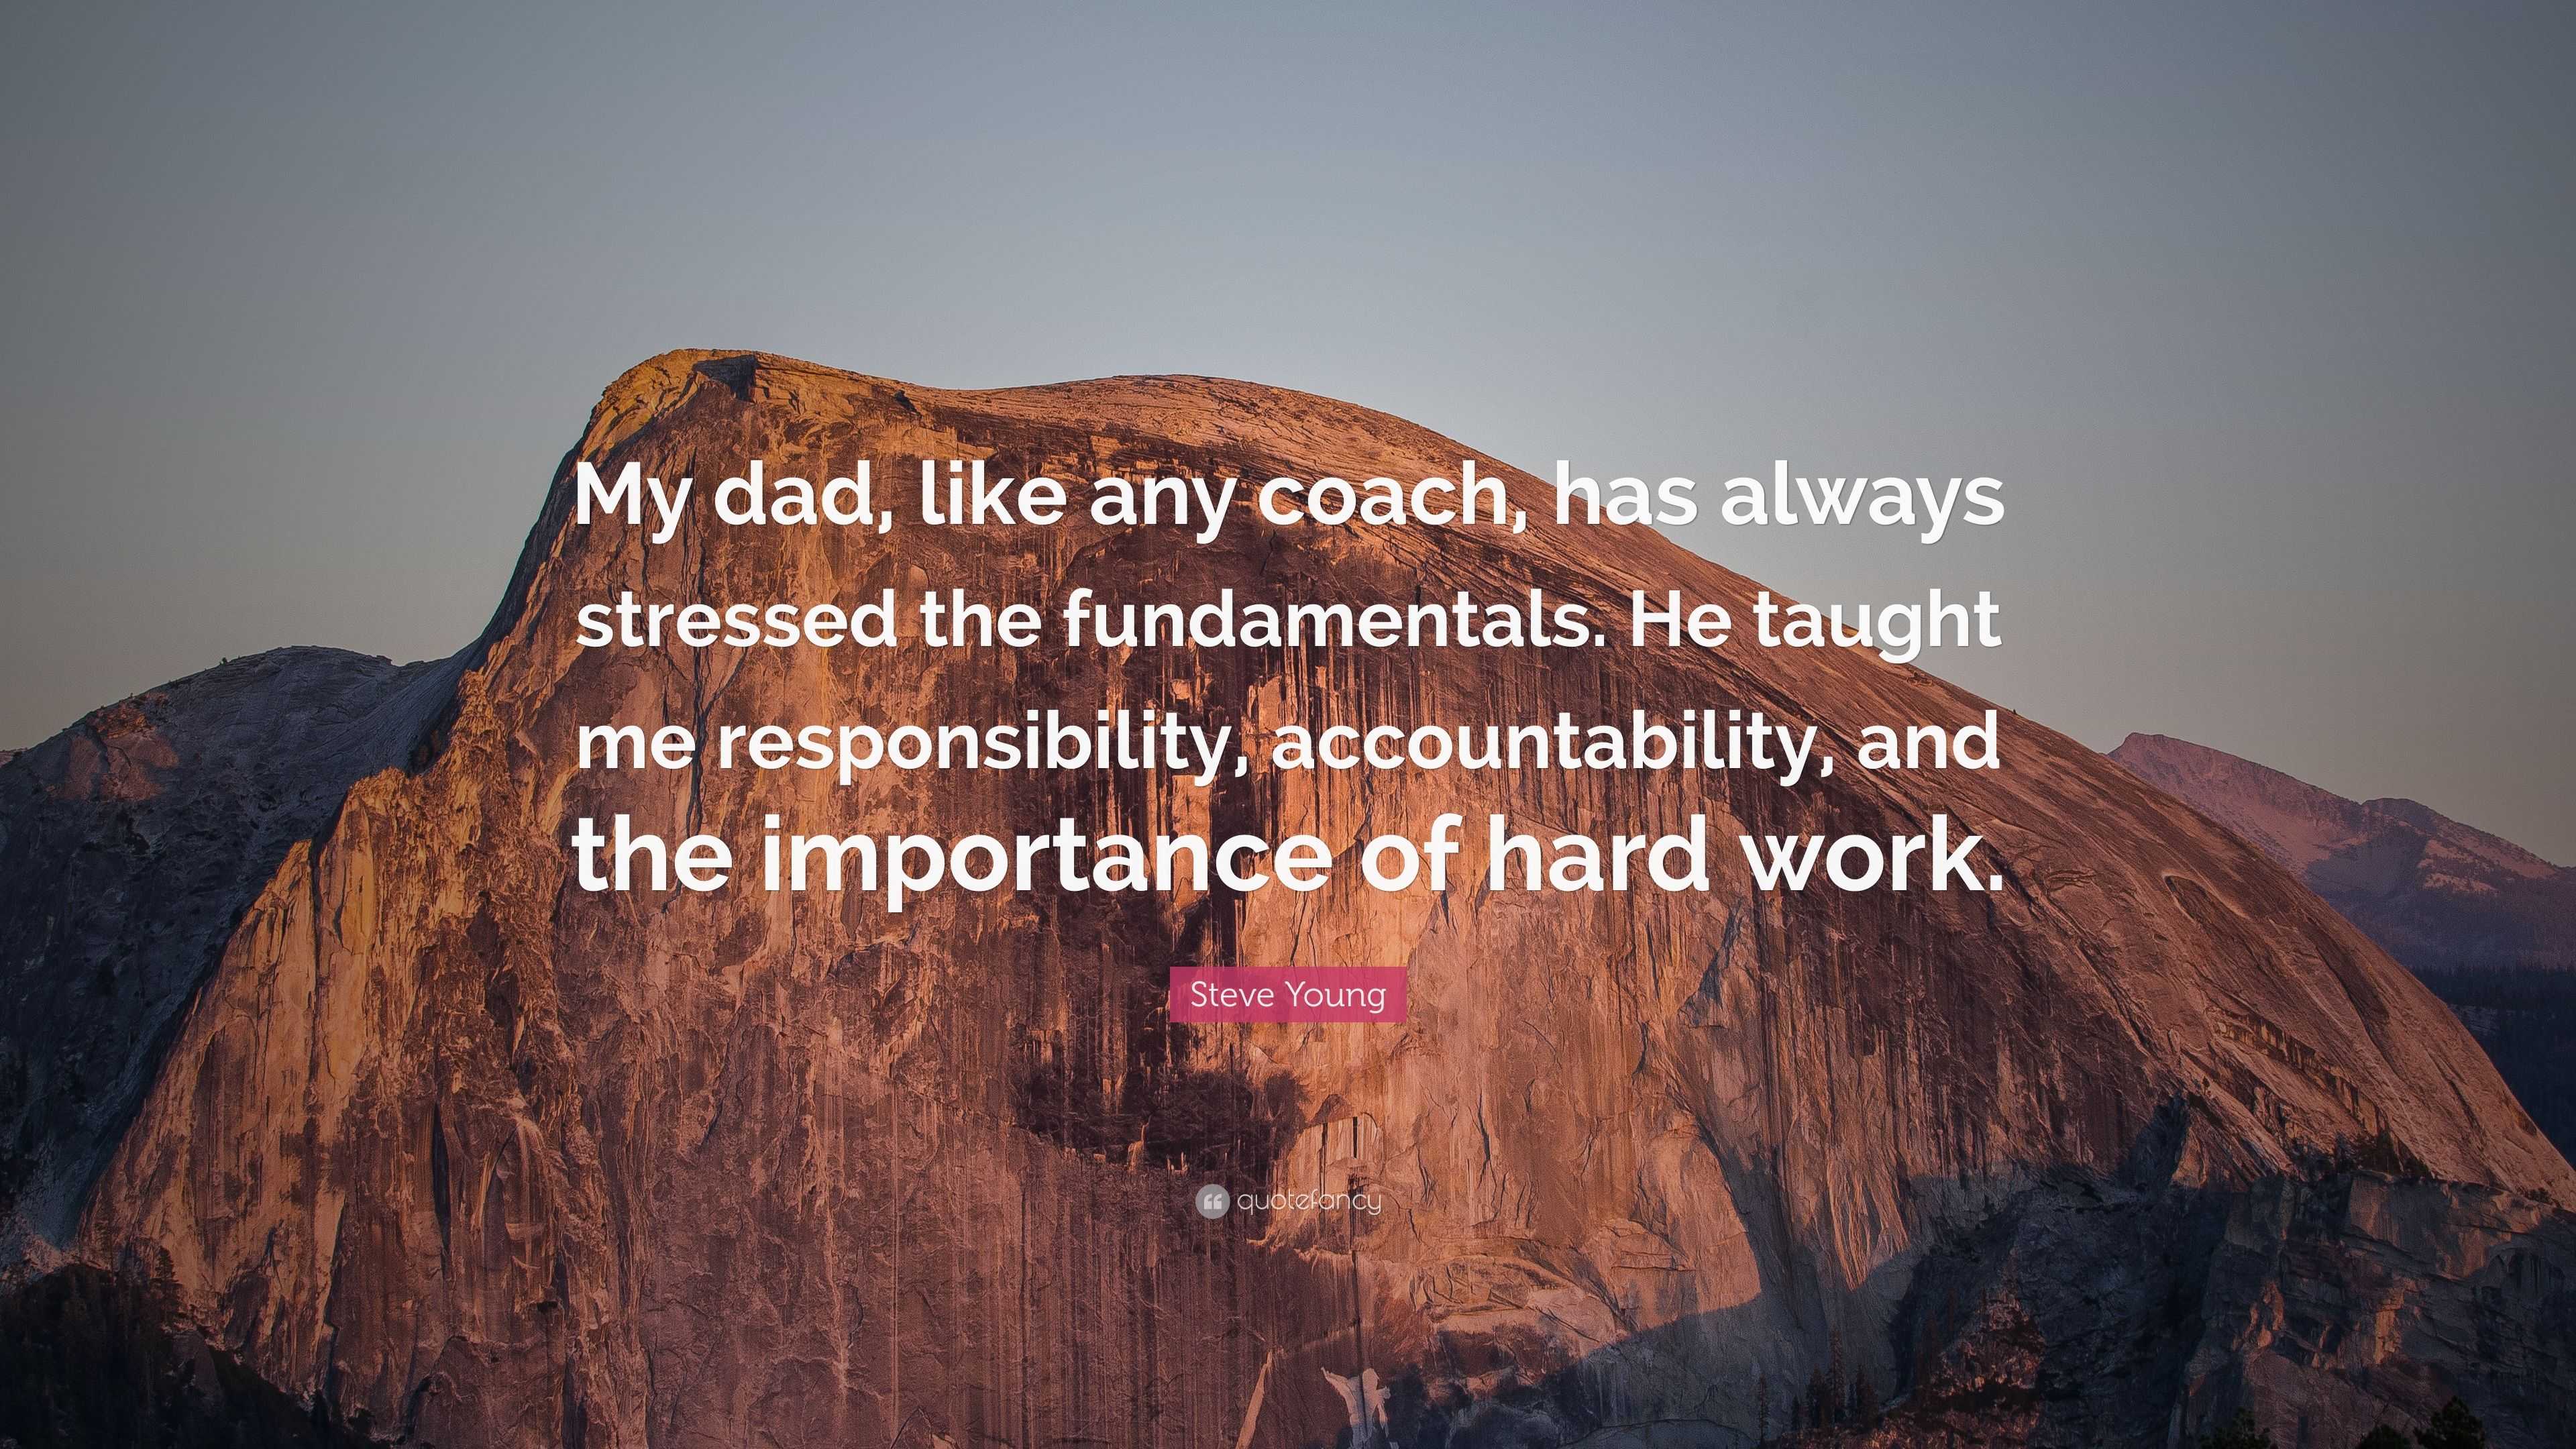 Steve Young Quote: “My dad, like any coach, has always stressed the  fundamentals. He taught me responsibility, accountability, and the impor...”